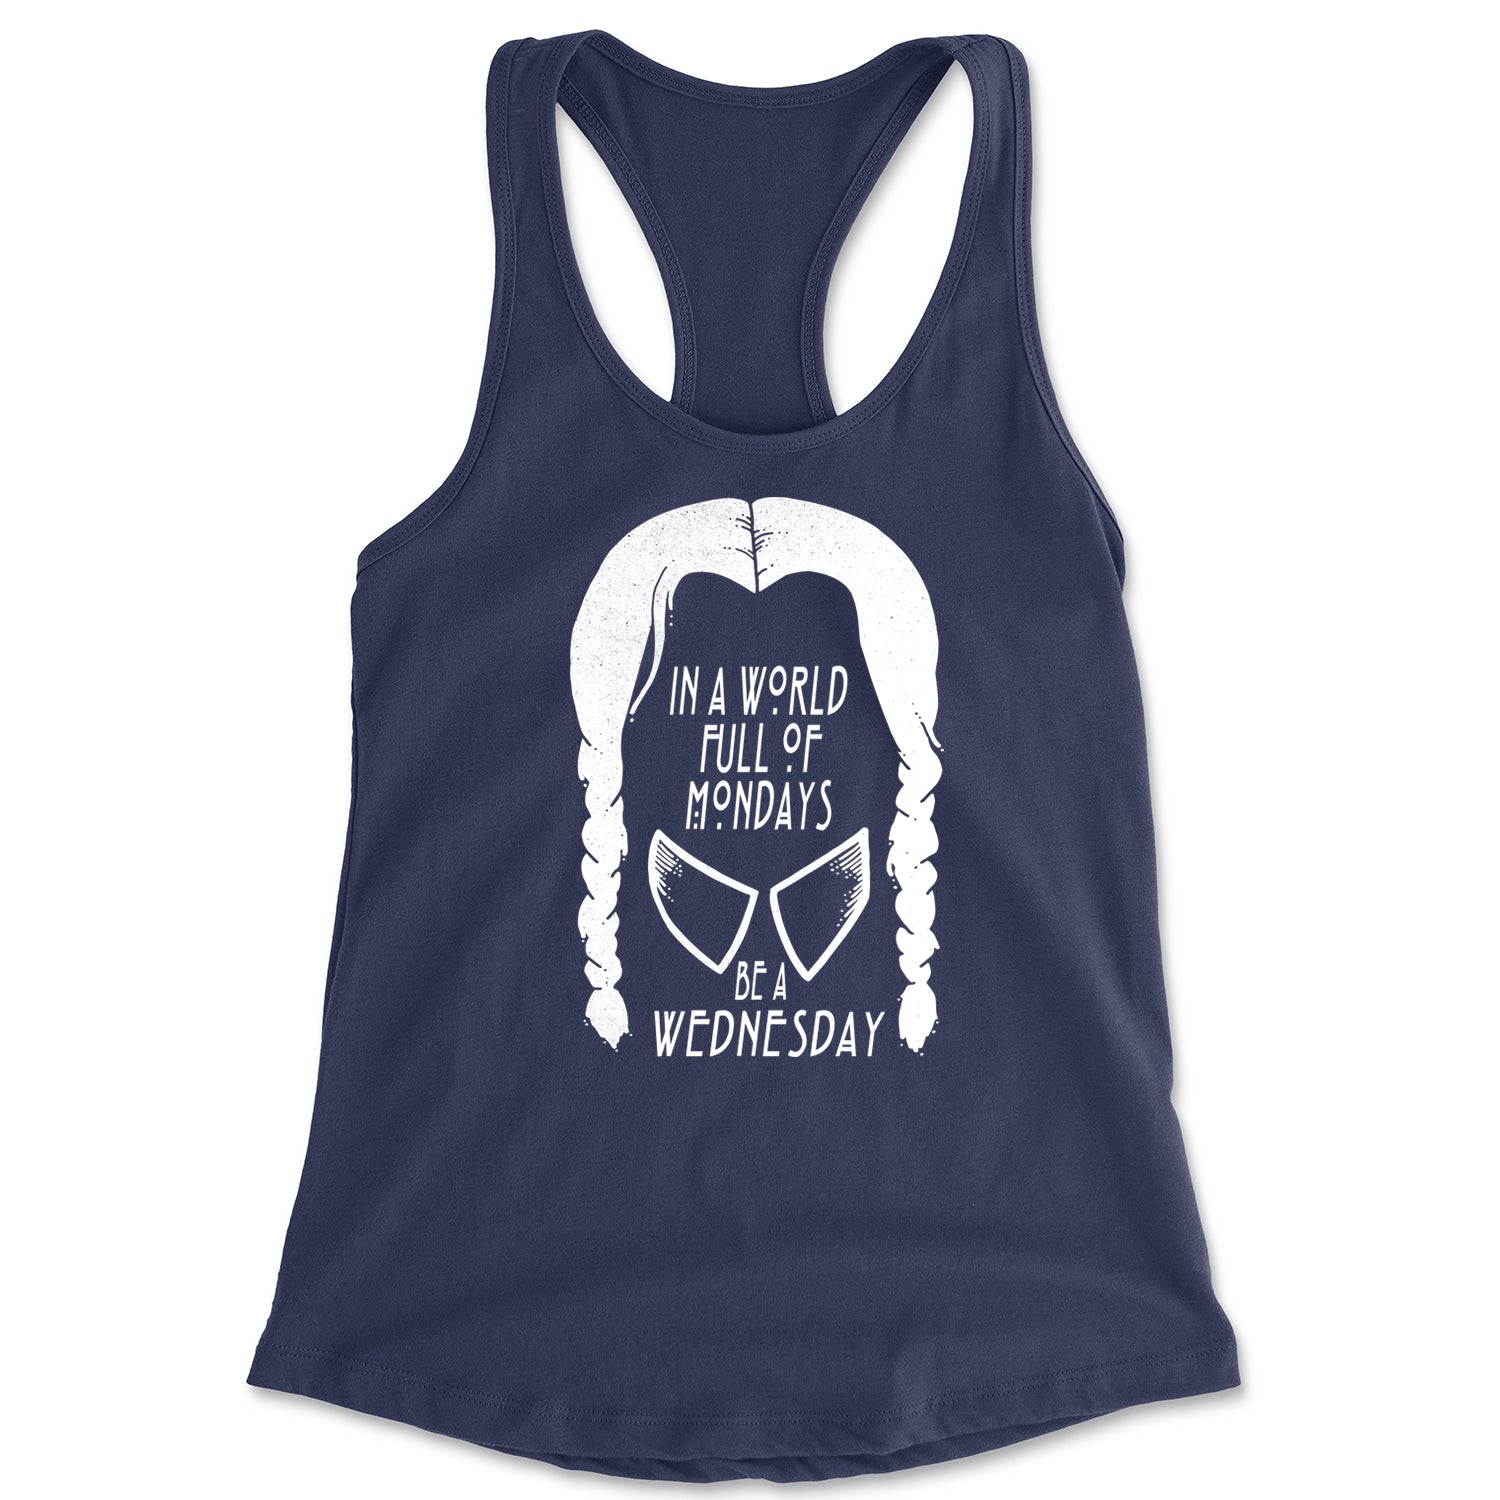 In A World Full Of Mondays, Be A Wednesday Racerback Tank Top for Women academy, jericho, more, never, nevermore, vermont, Wednesday by Expression Tees